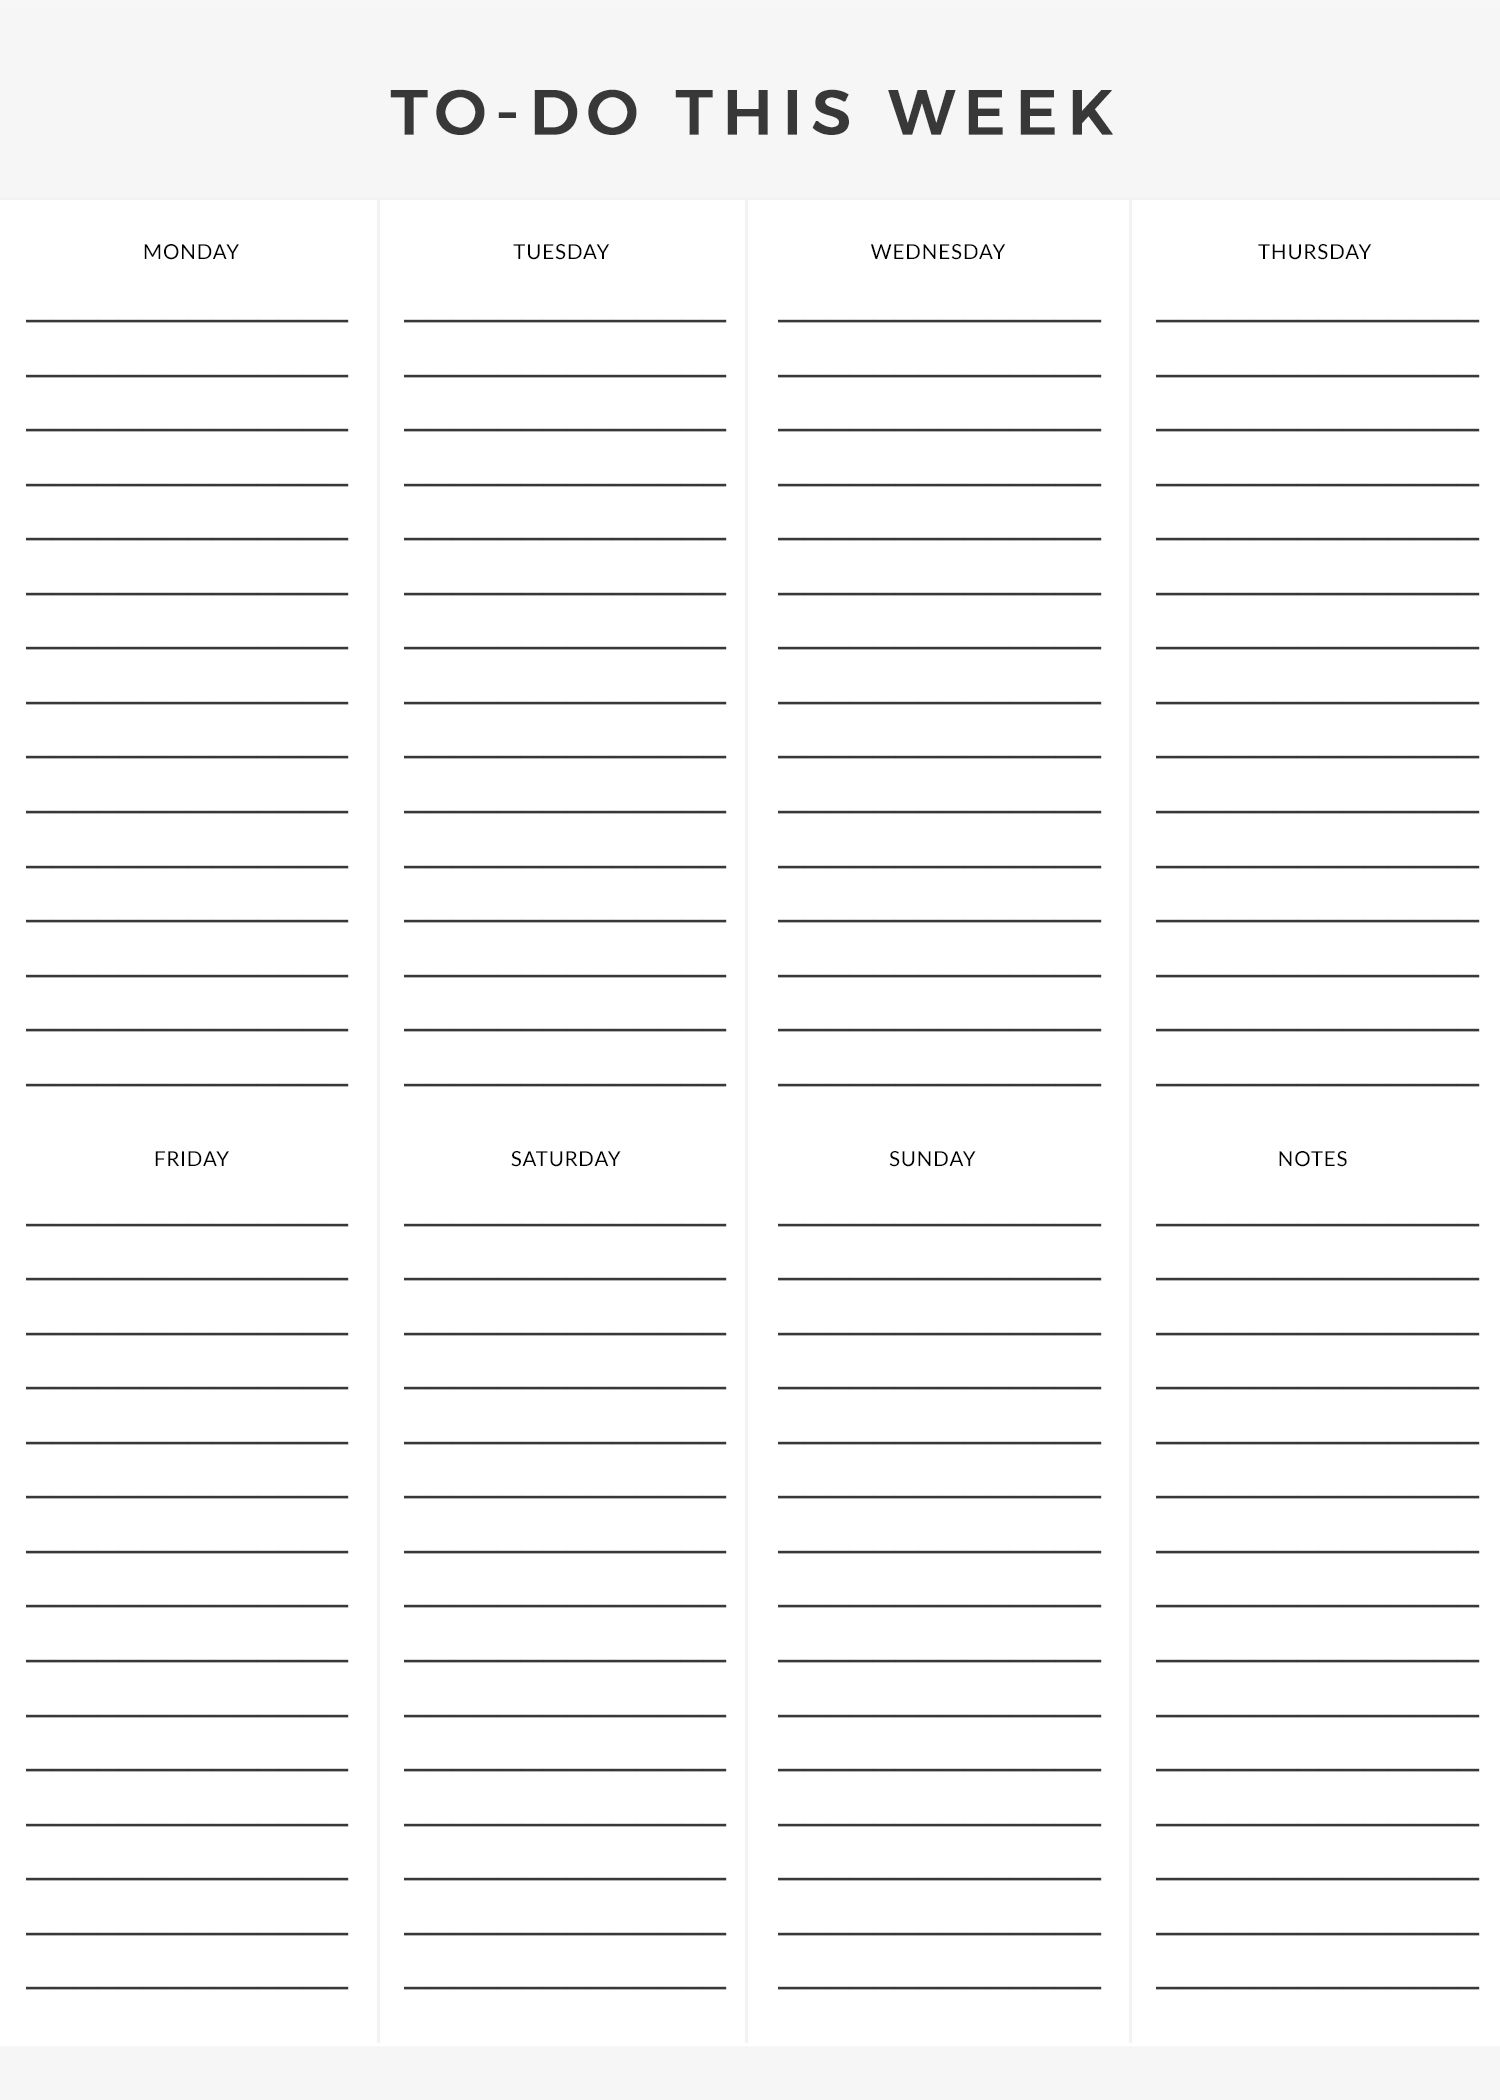 Free printable weekly to do list | Home / Workspace | Pinterest 